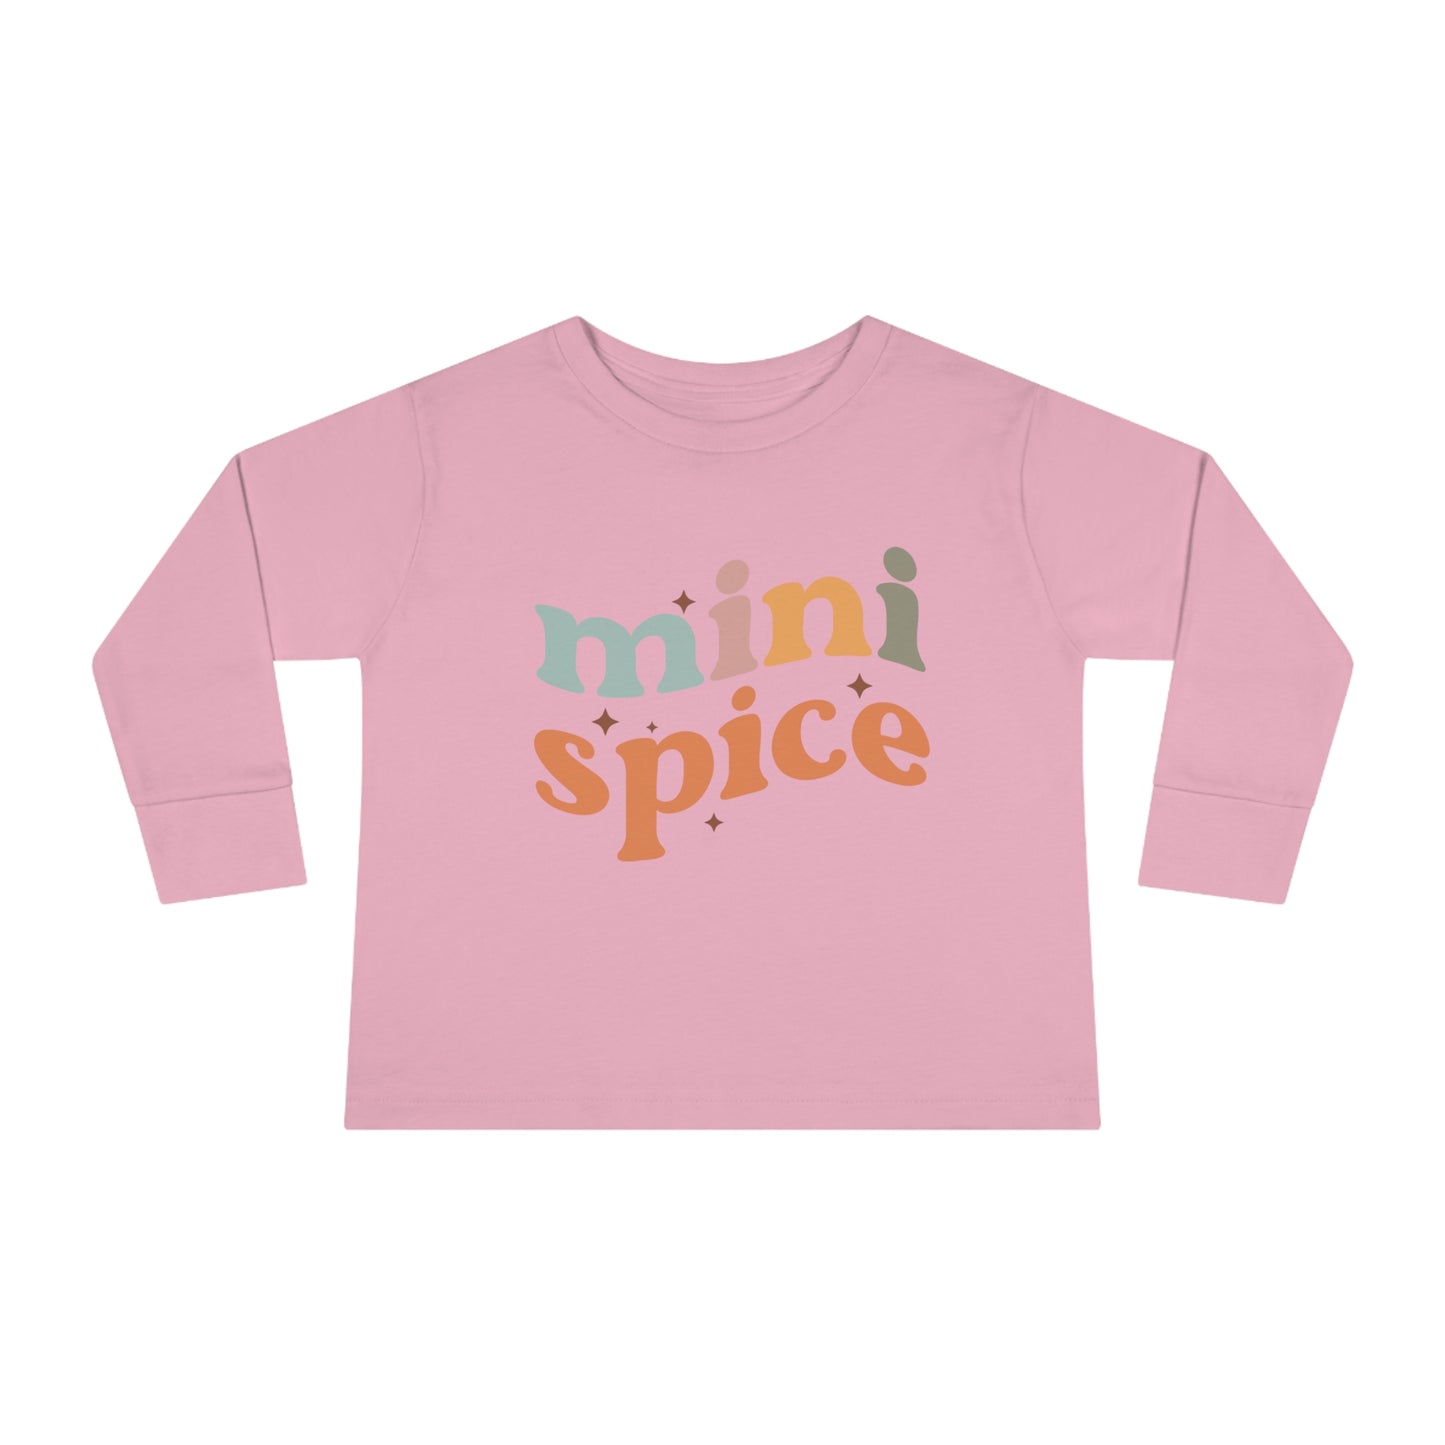 Style 3 Toddler Mini Spice Long Sleeve Tee